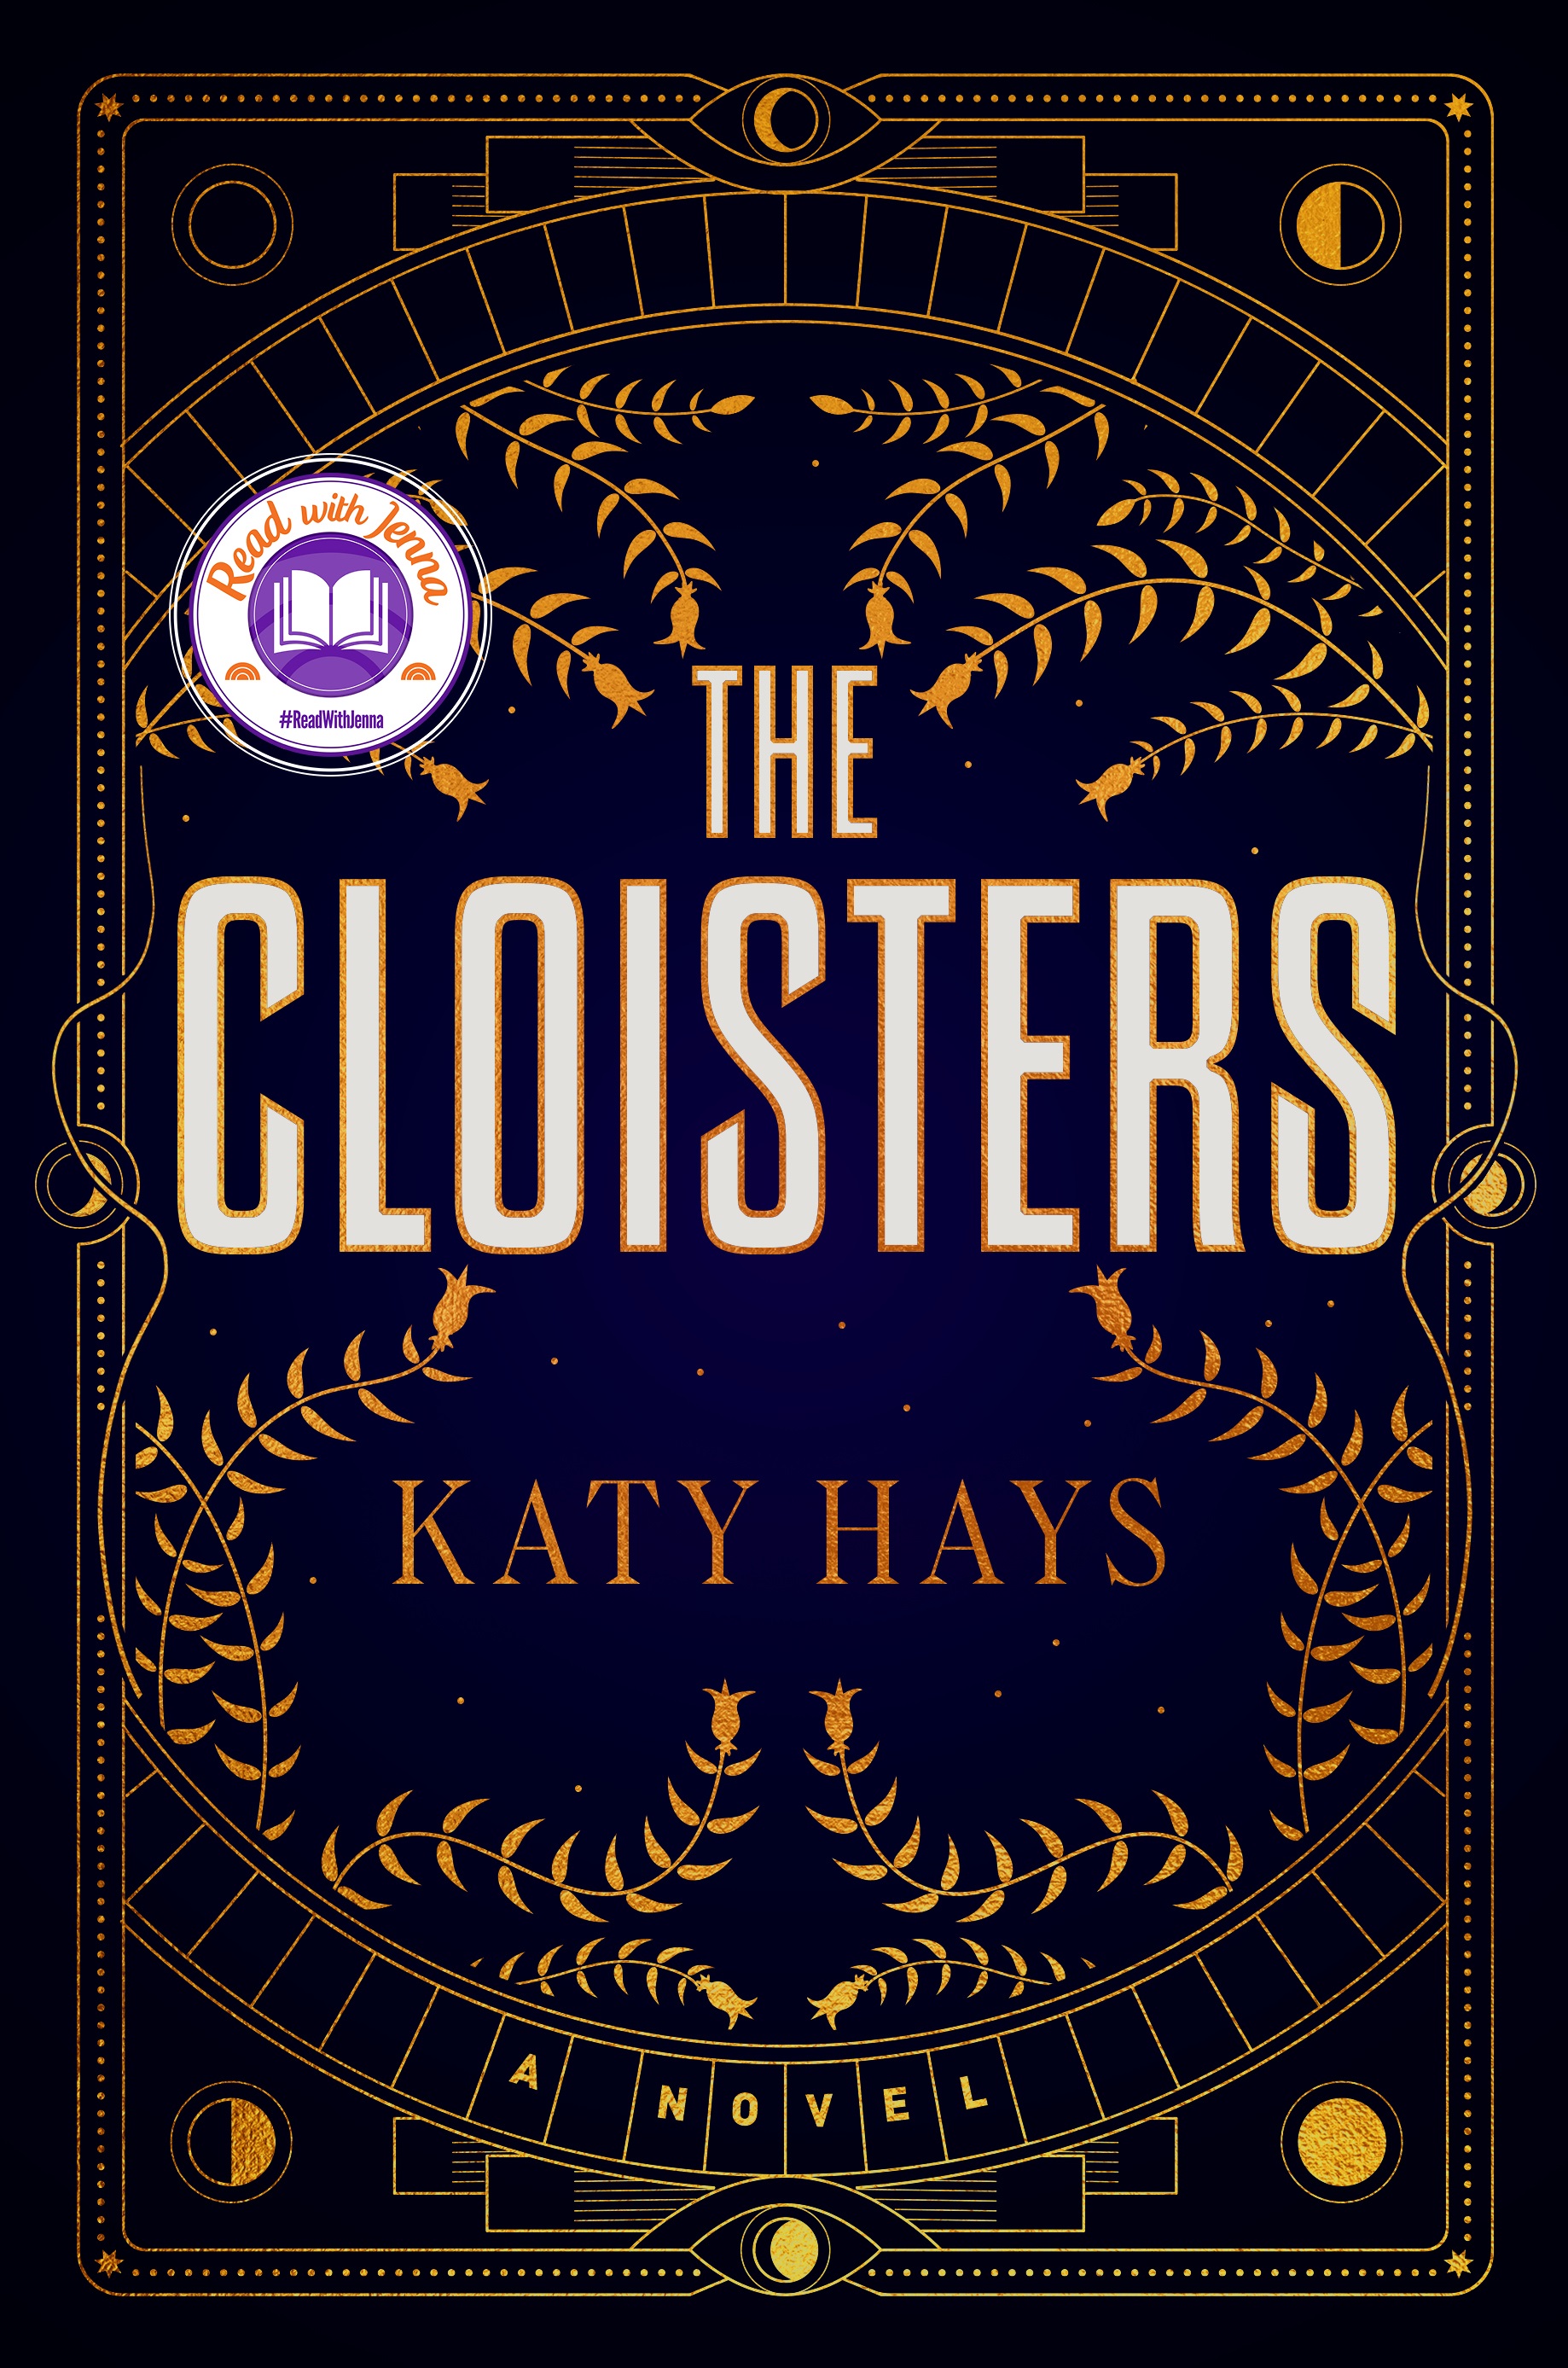 The Cloisters by Katy Hays Free Download